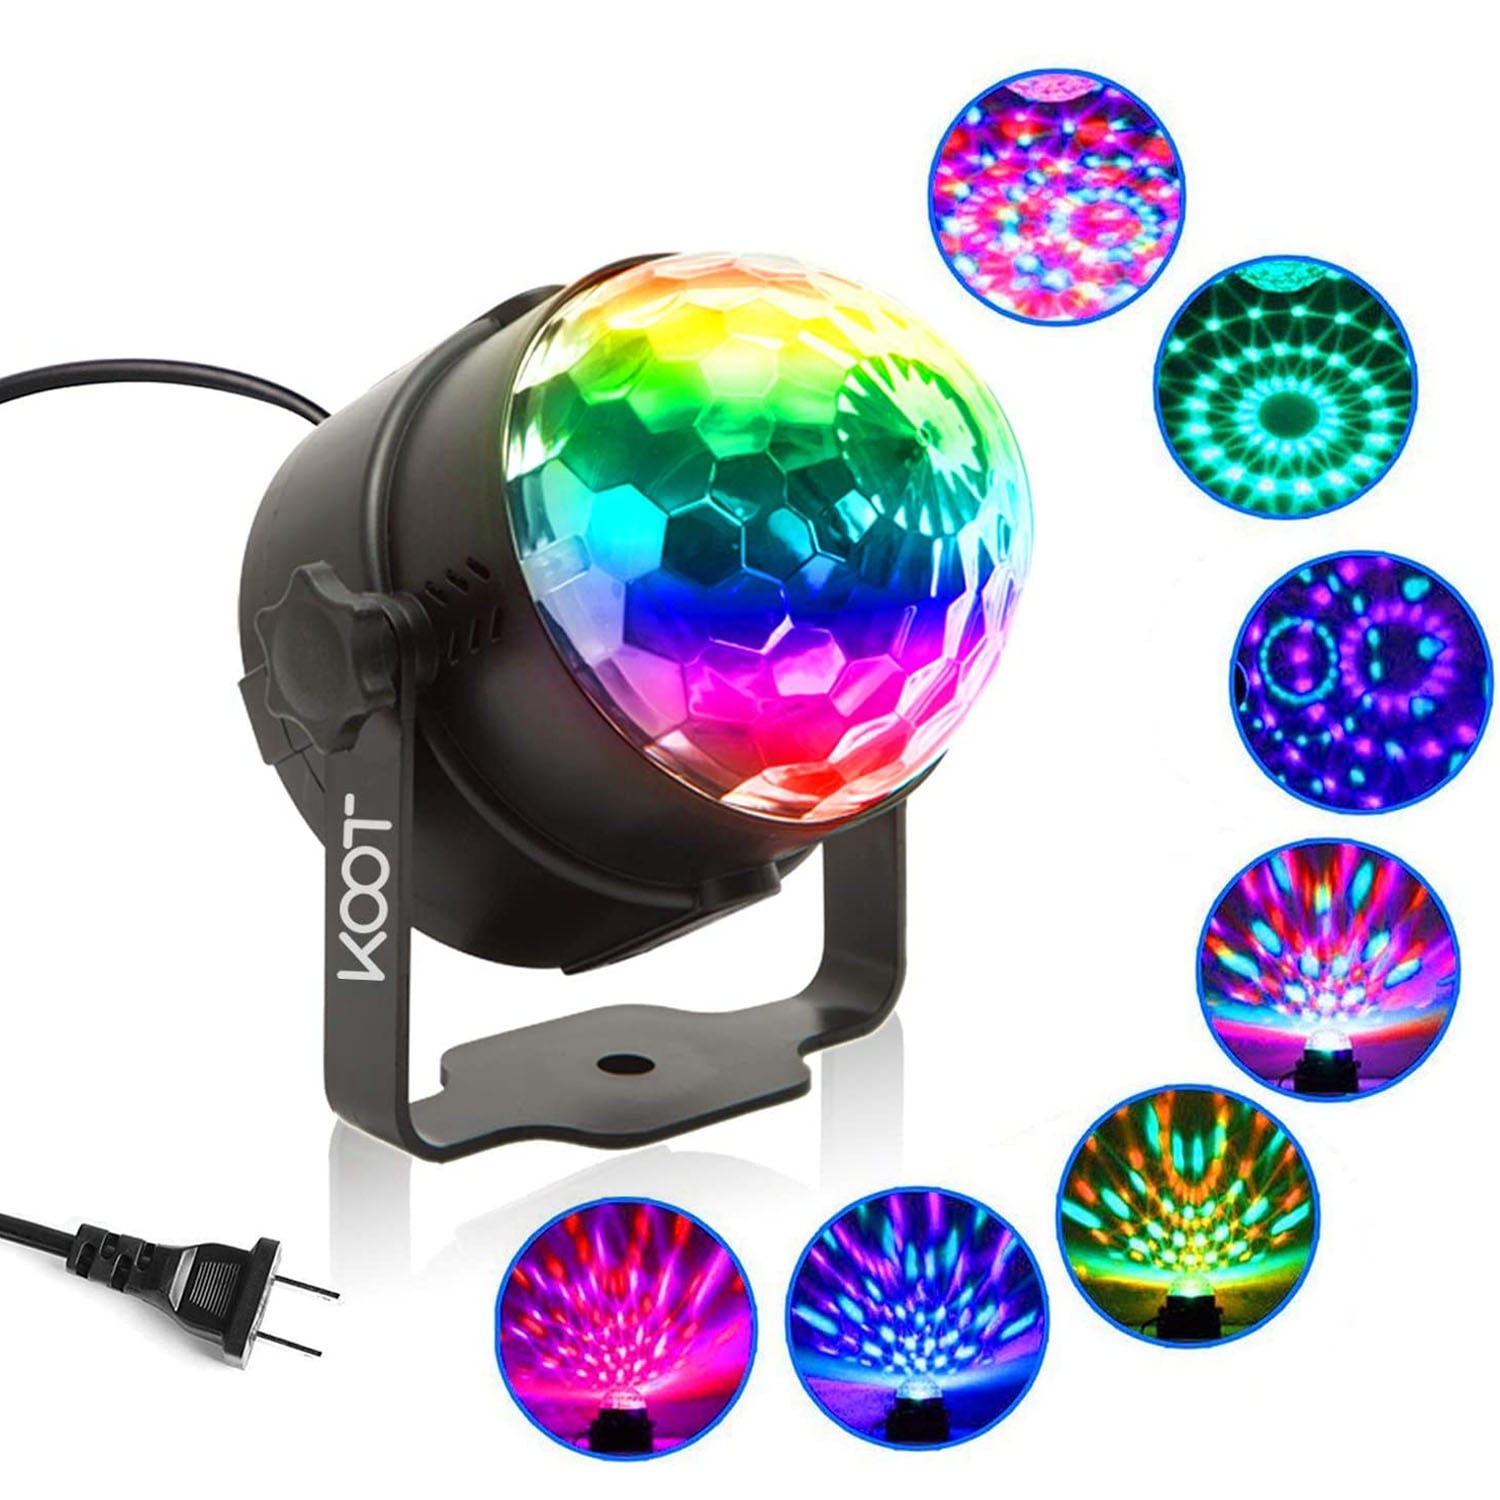 RGB Color LED Strobe Light with Remote,Flash Stage Party Light Sound Activated and Speed Control for DJ Party Club KTV Home Christmas 